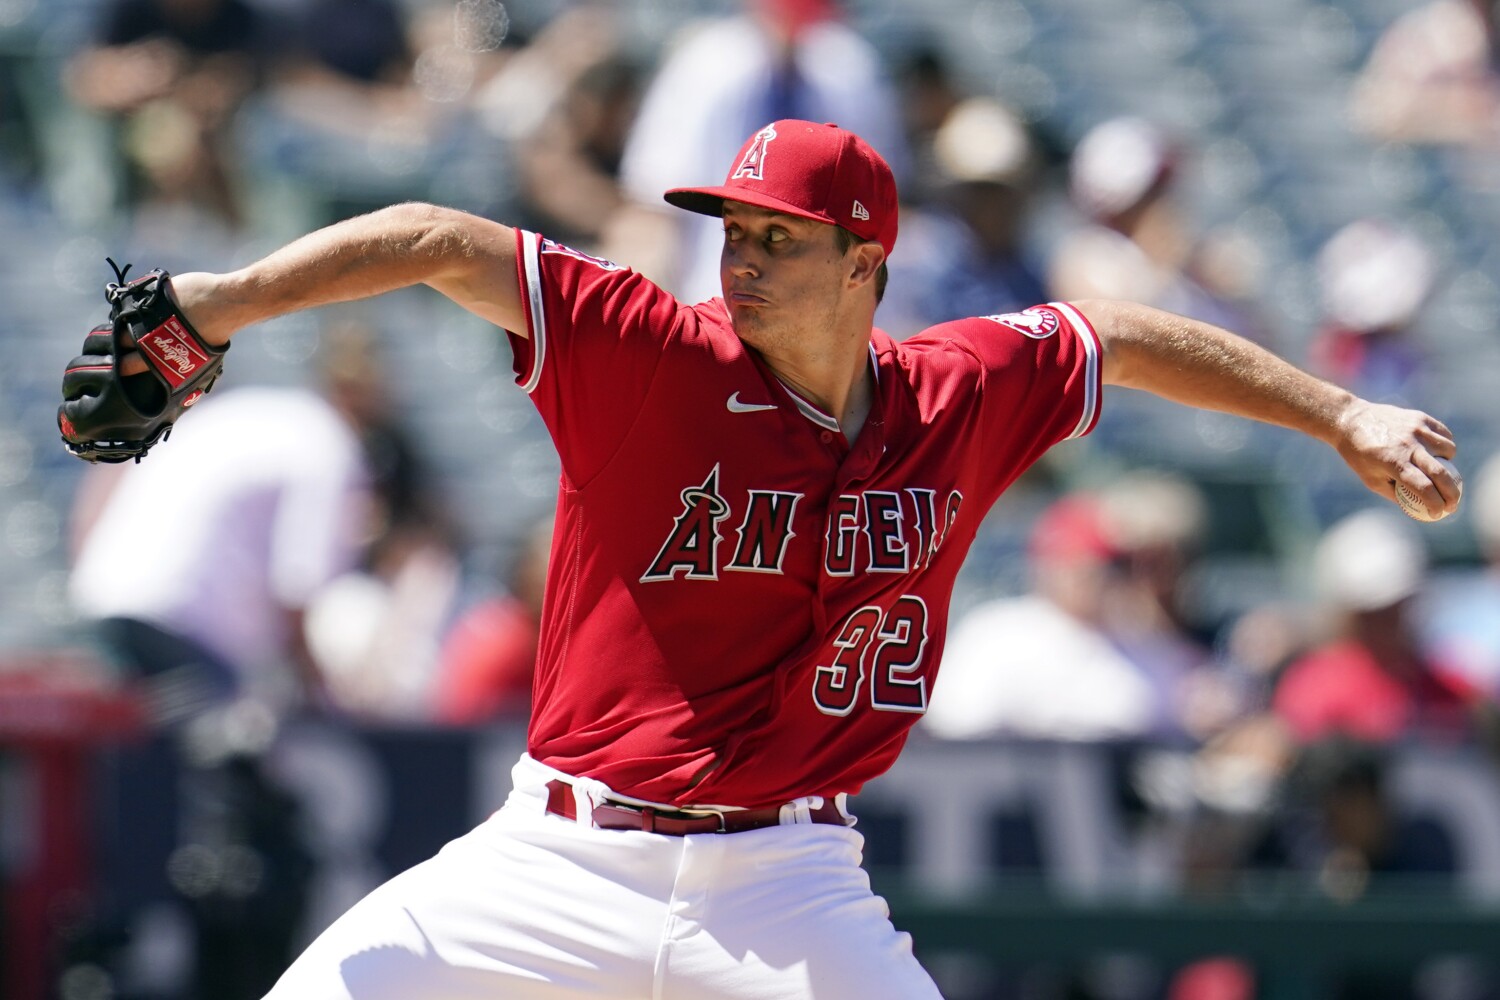 Tucker Davidson showcases plenty of improvement to earn his first Angels win